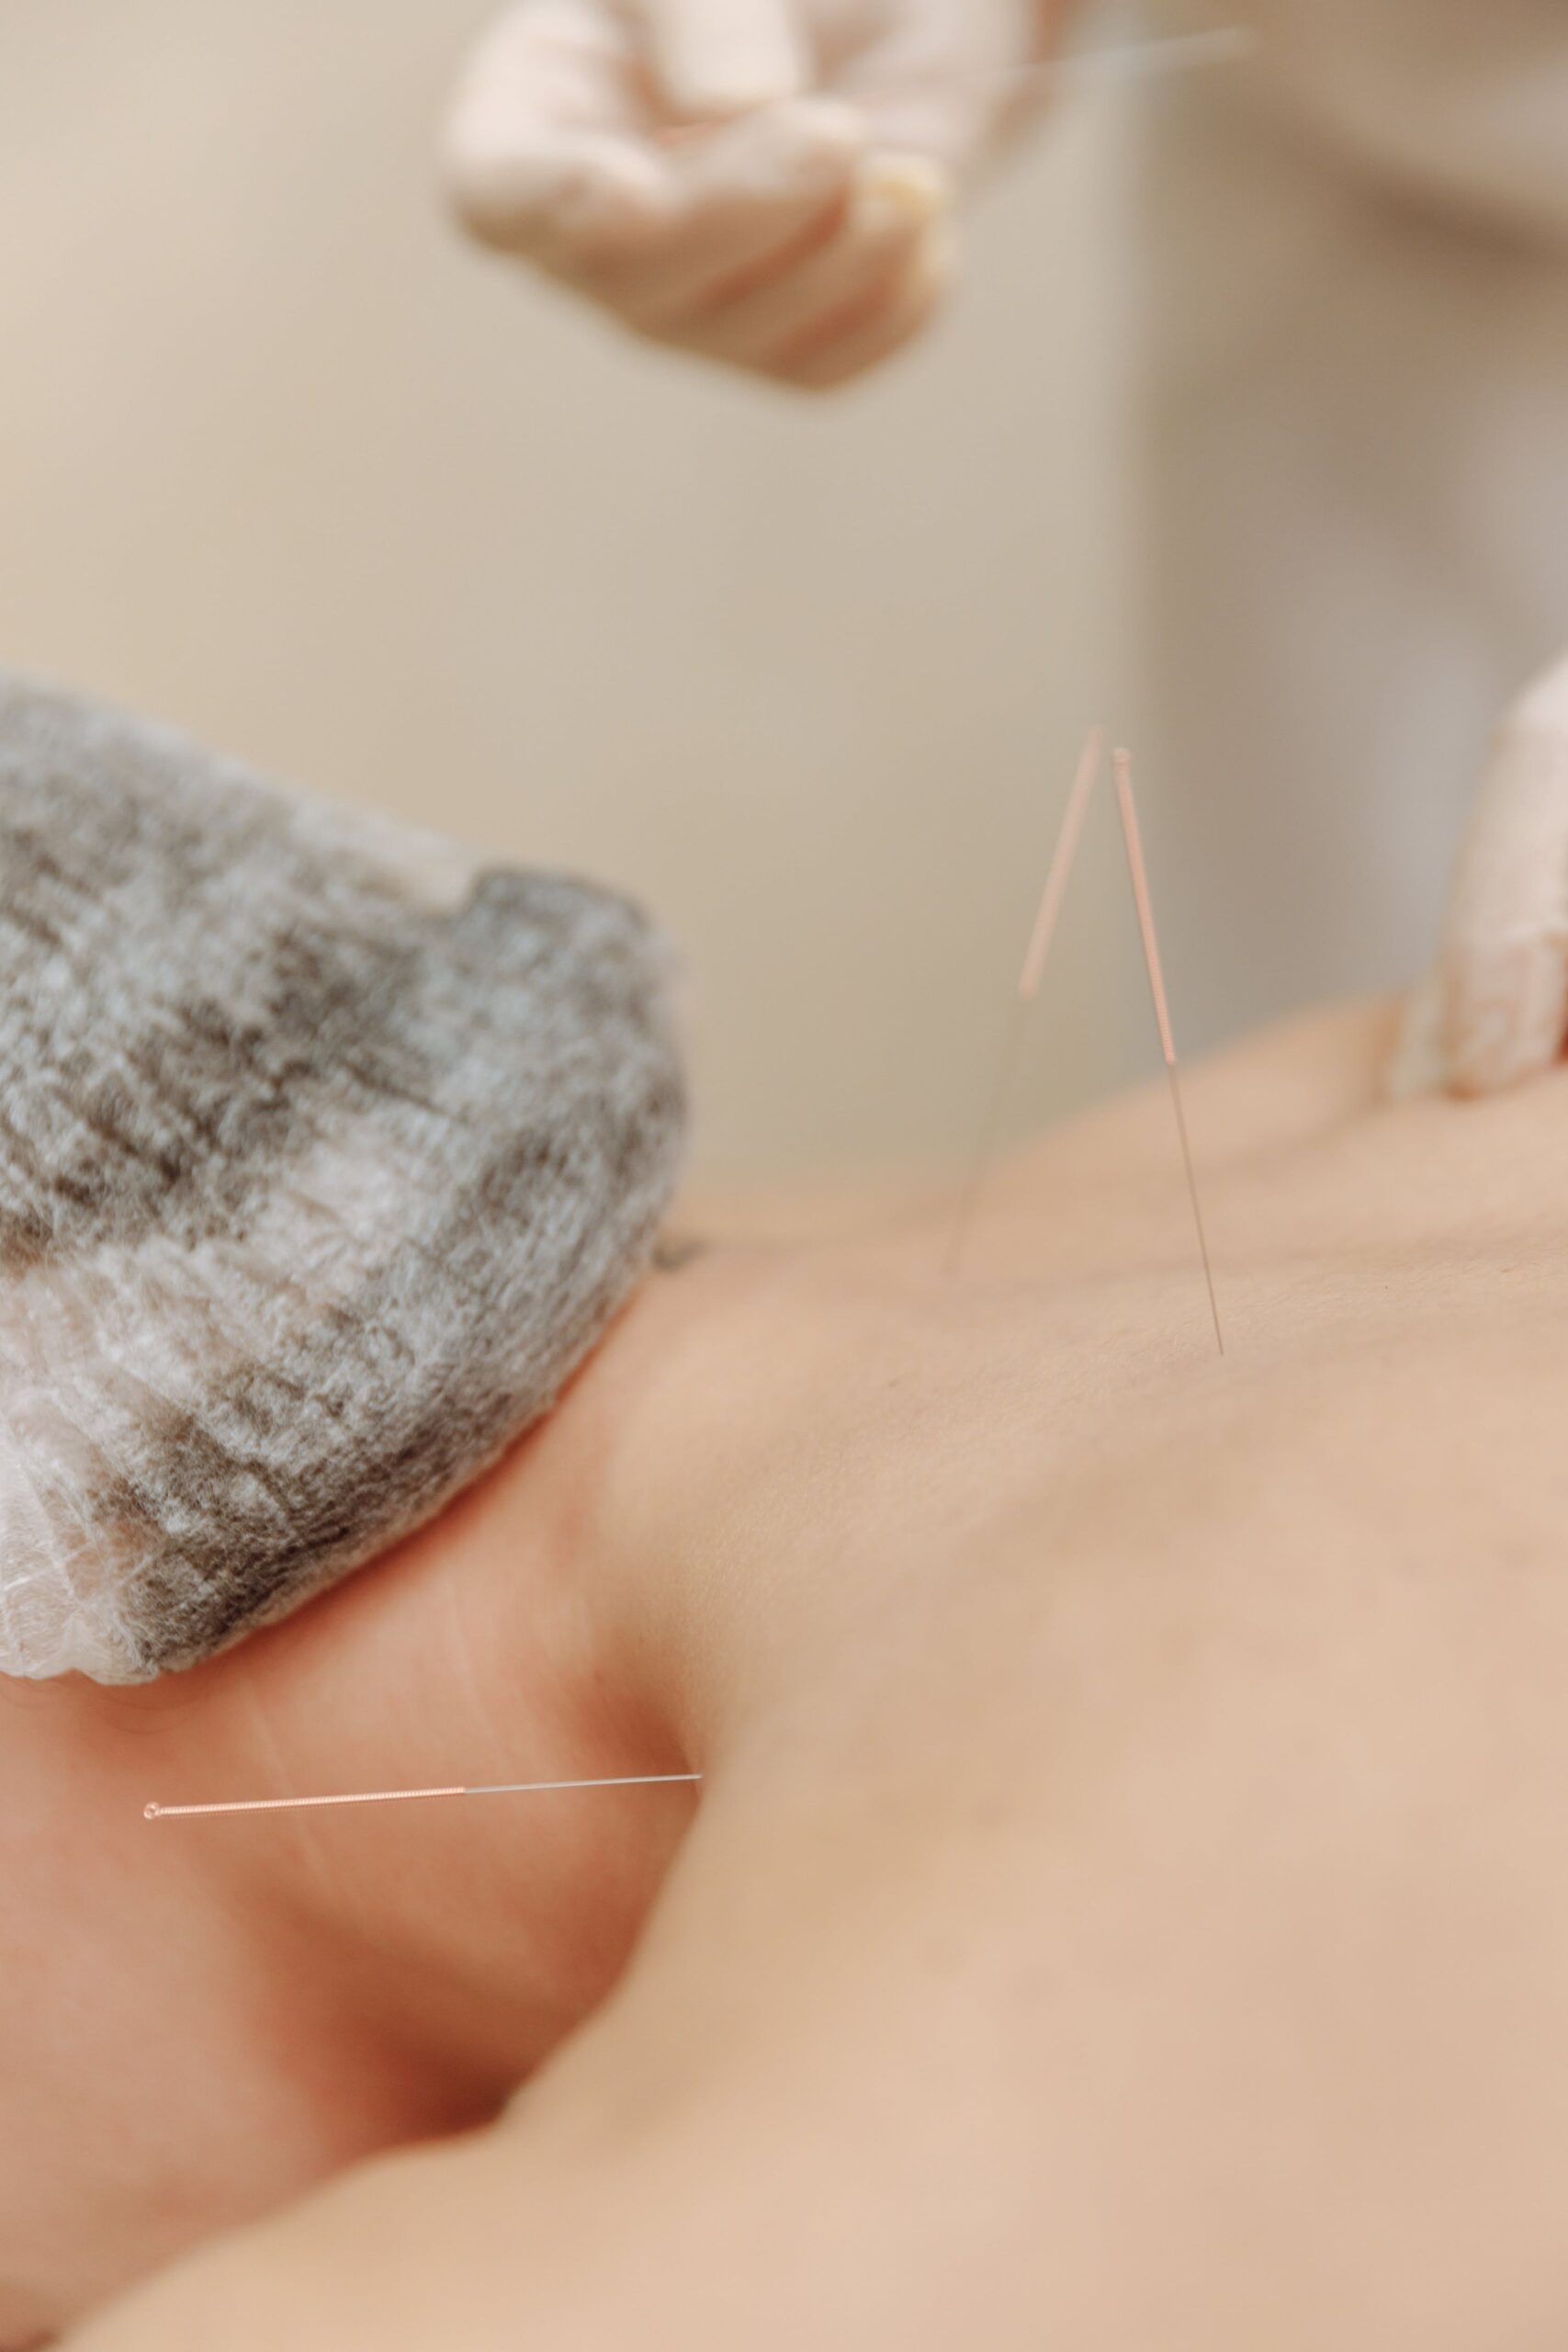 HOW TO USE ACUPUNCTURE FOR BACK PAIN MANAGEMENT